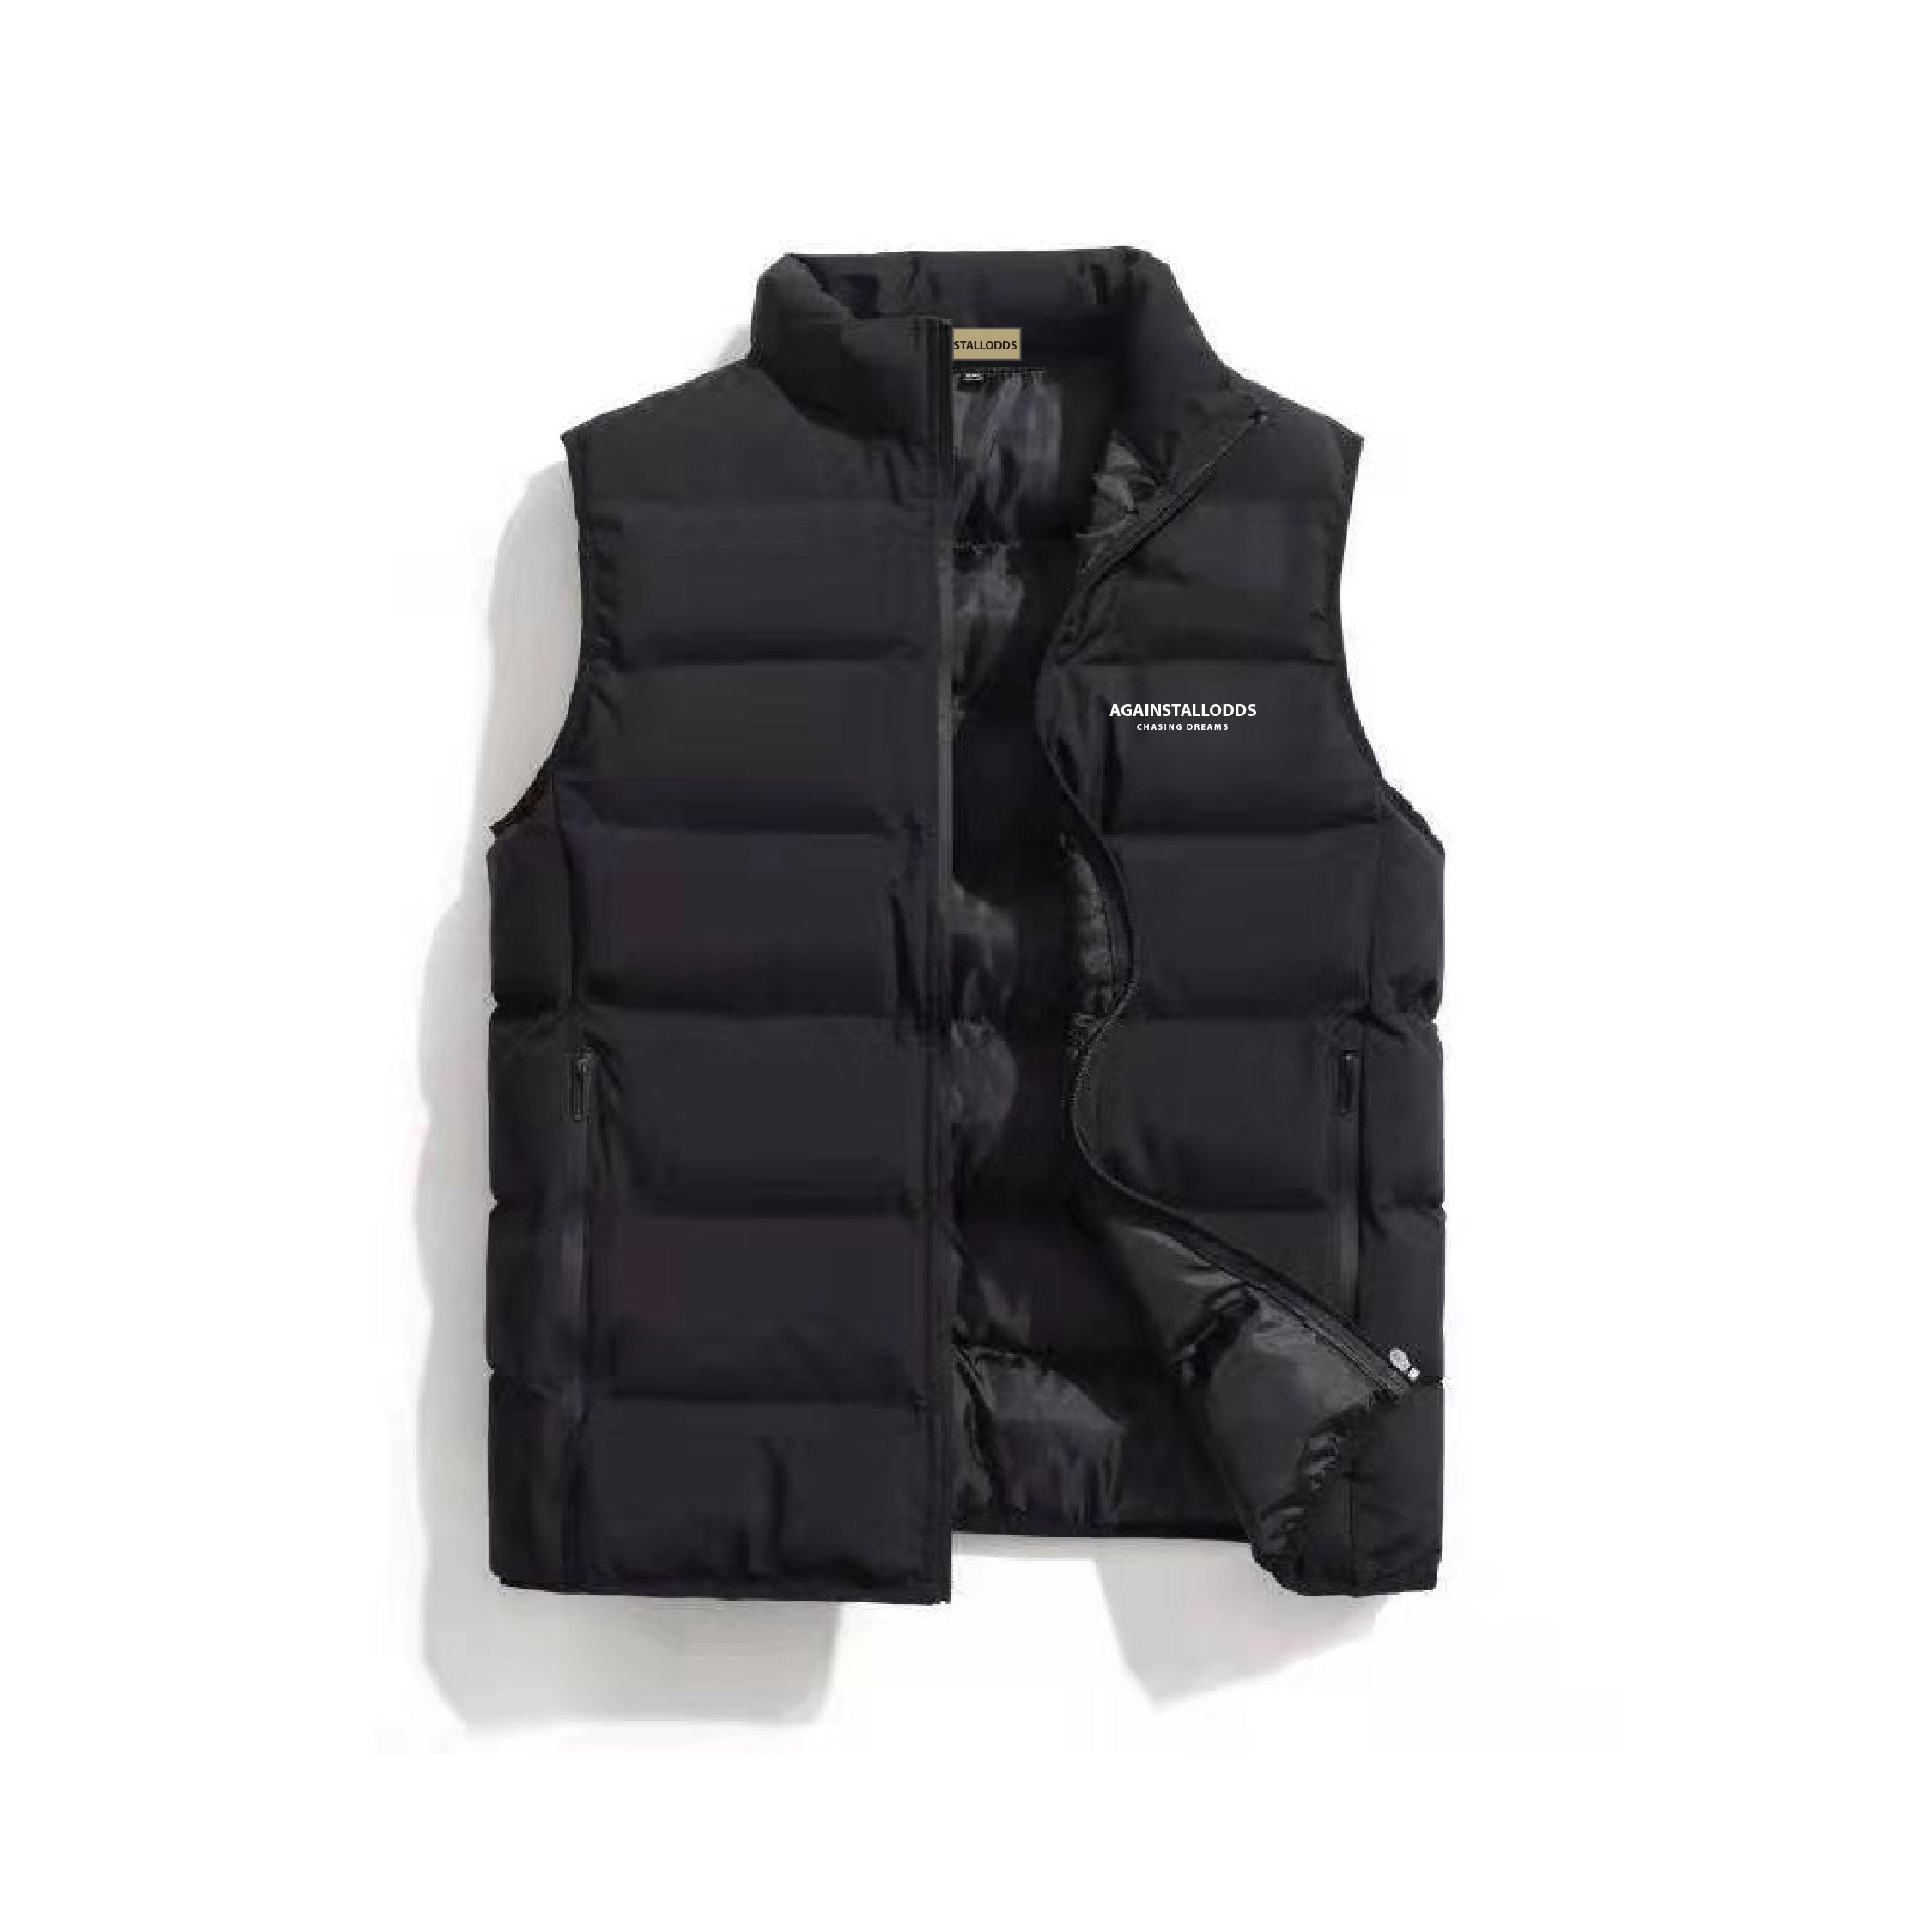 THE DREAMERS CASUAL GILET - BLACK